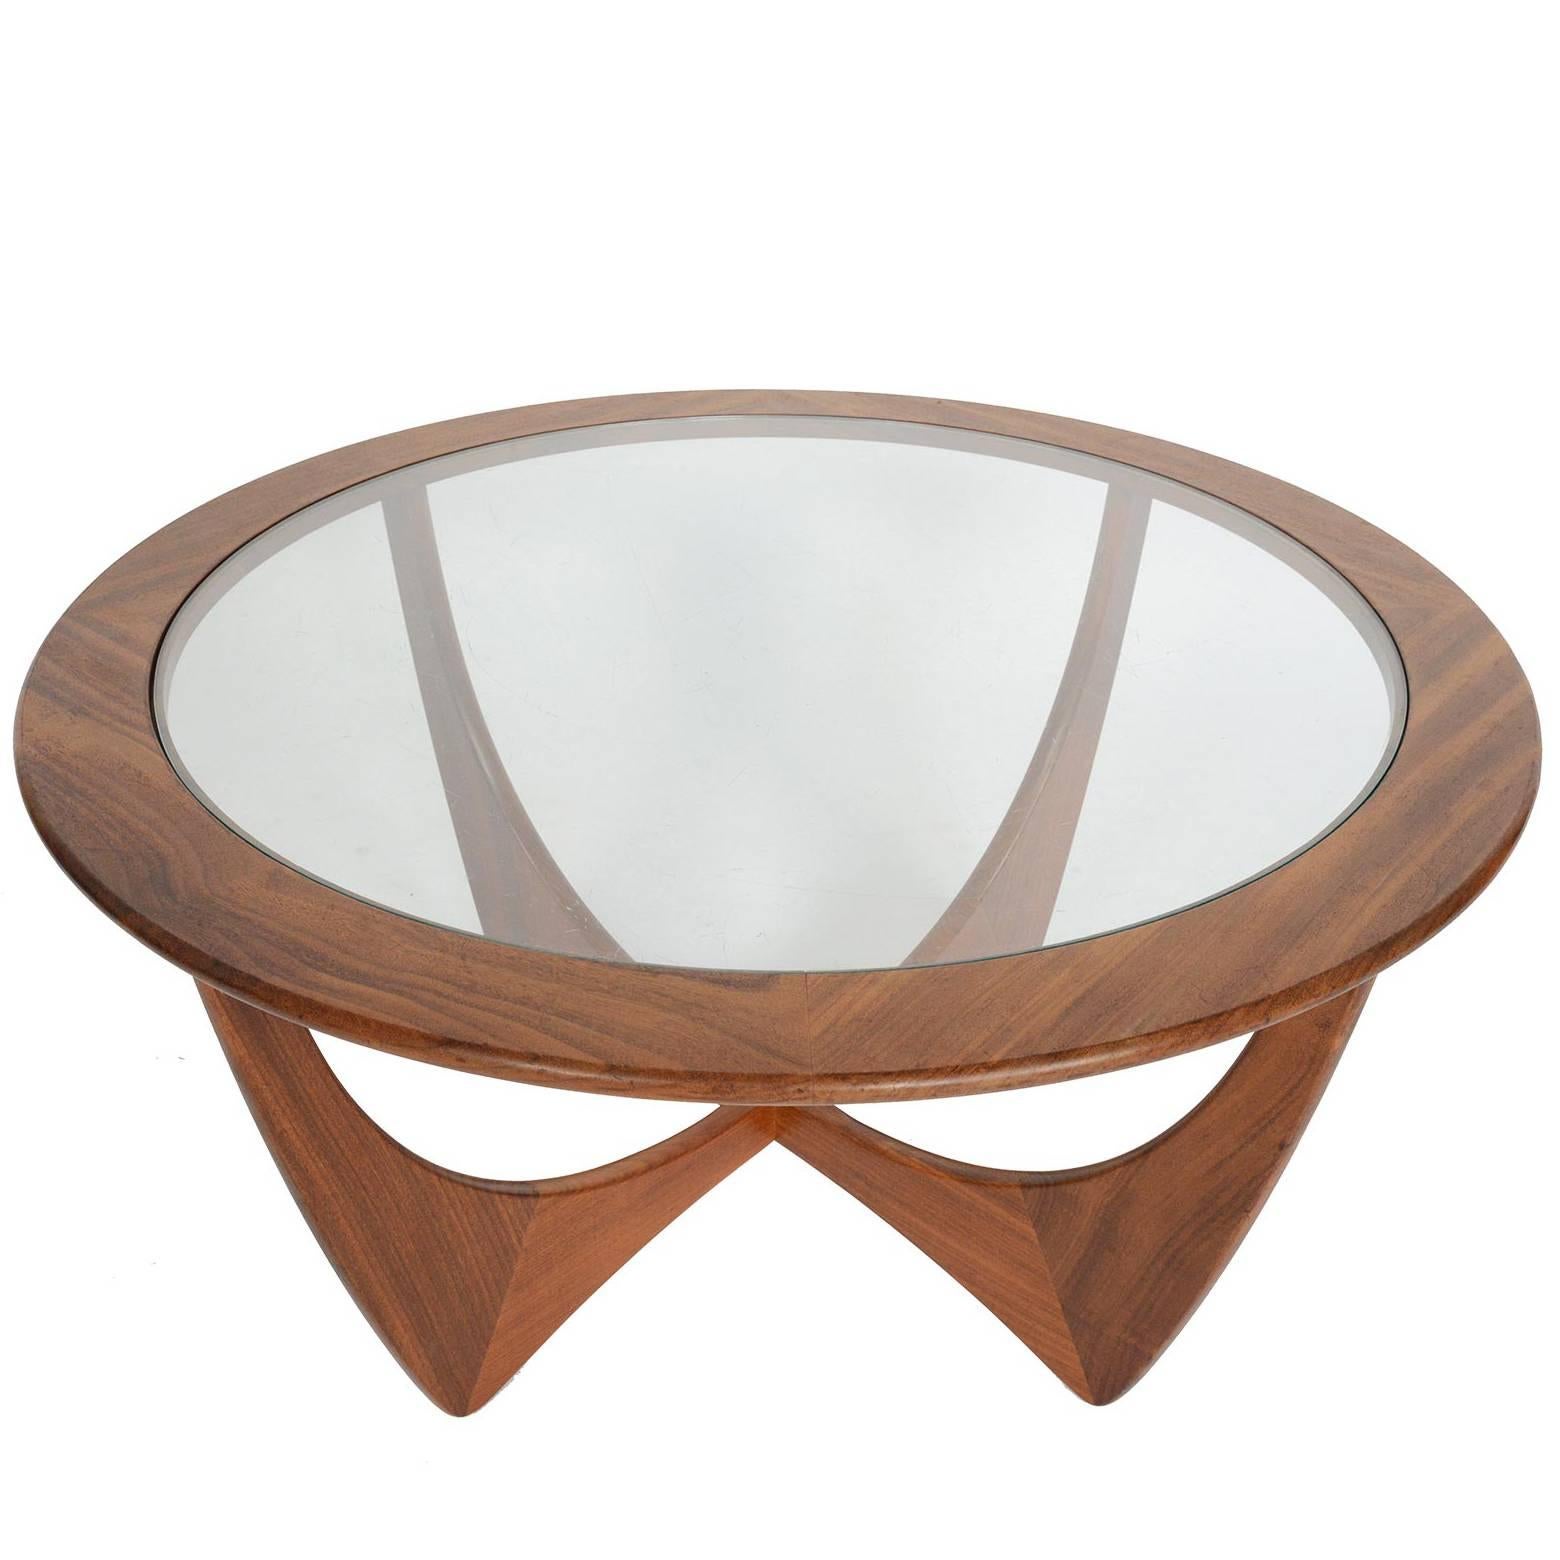 Round G Plan Astro Mid-Century Modern Coffee Table in Afromosia #3